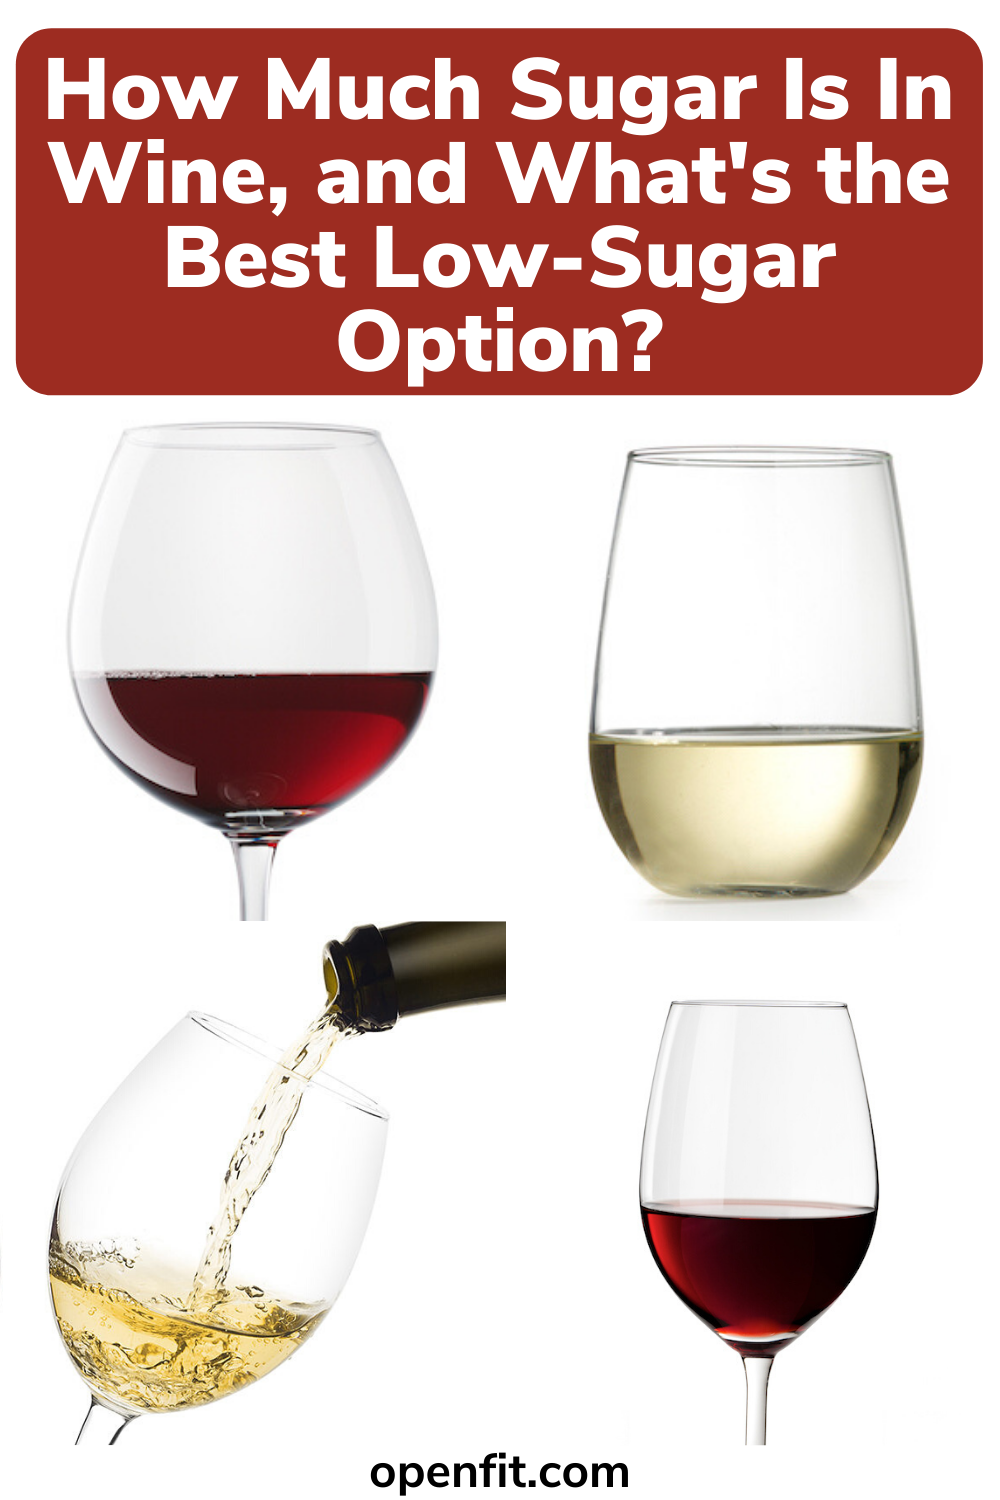 How Much Sugar Is In Wine and Which Has The Least